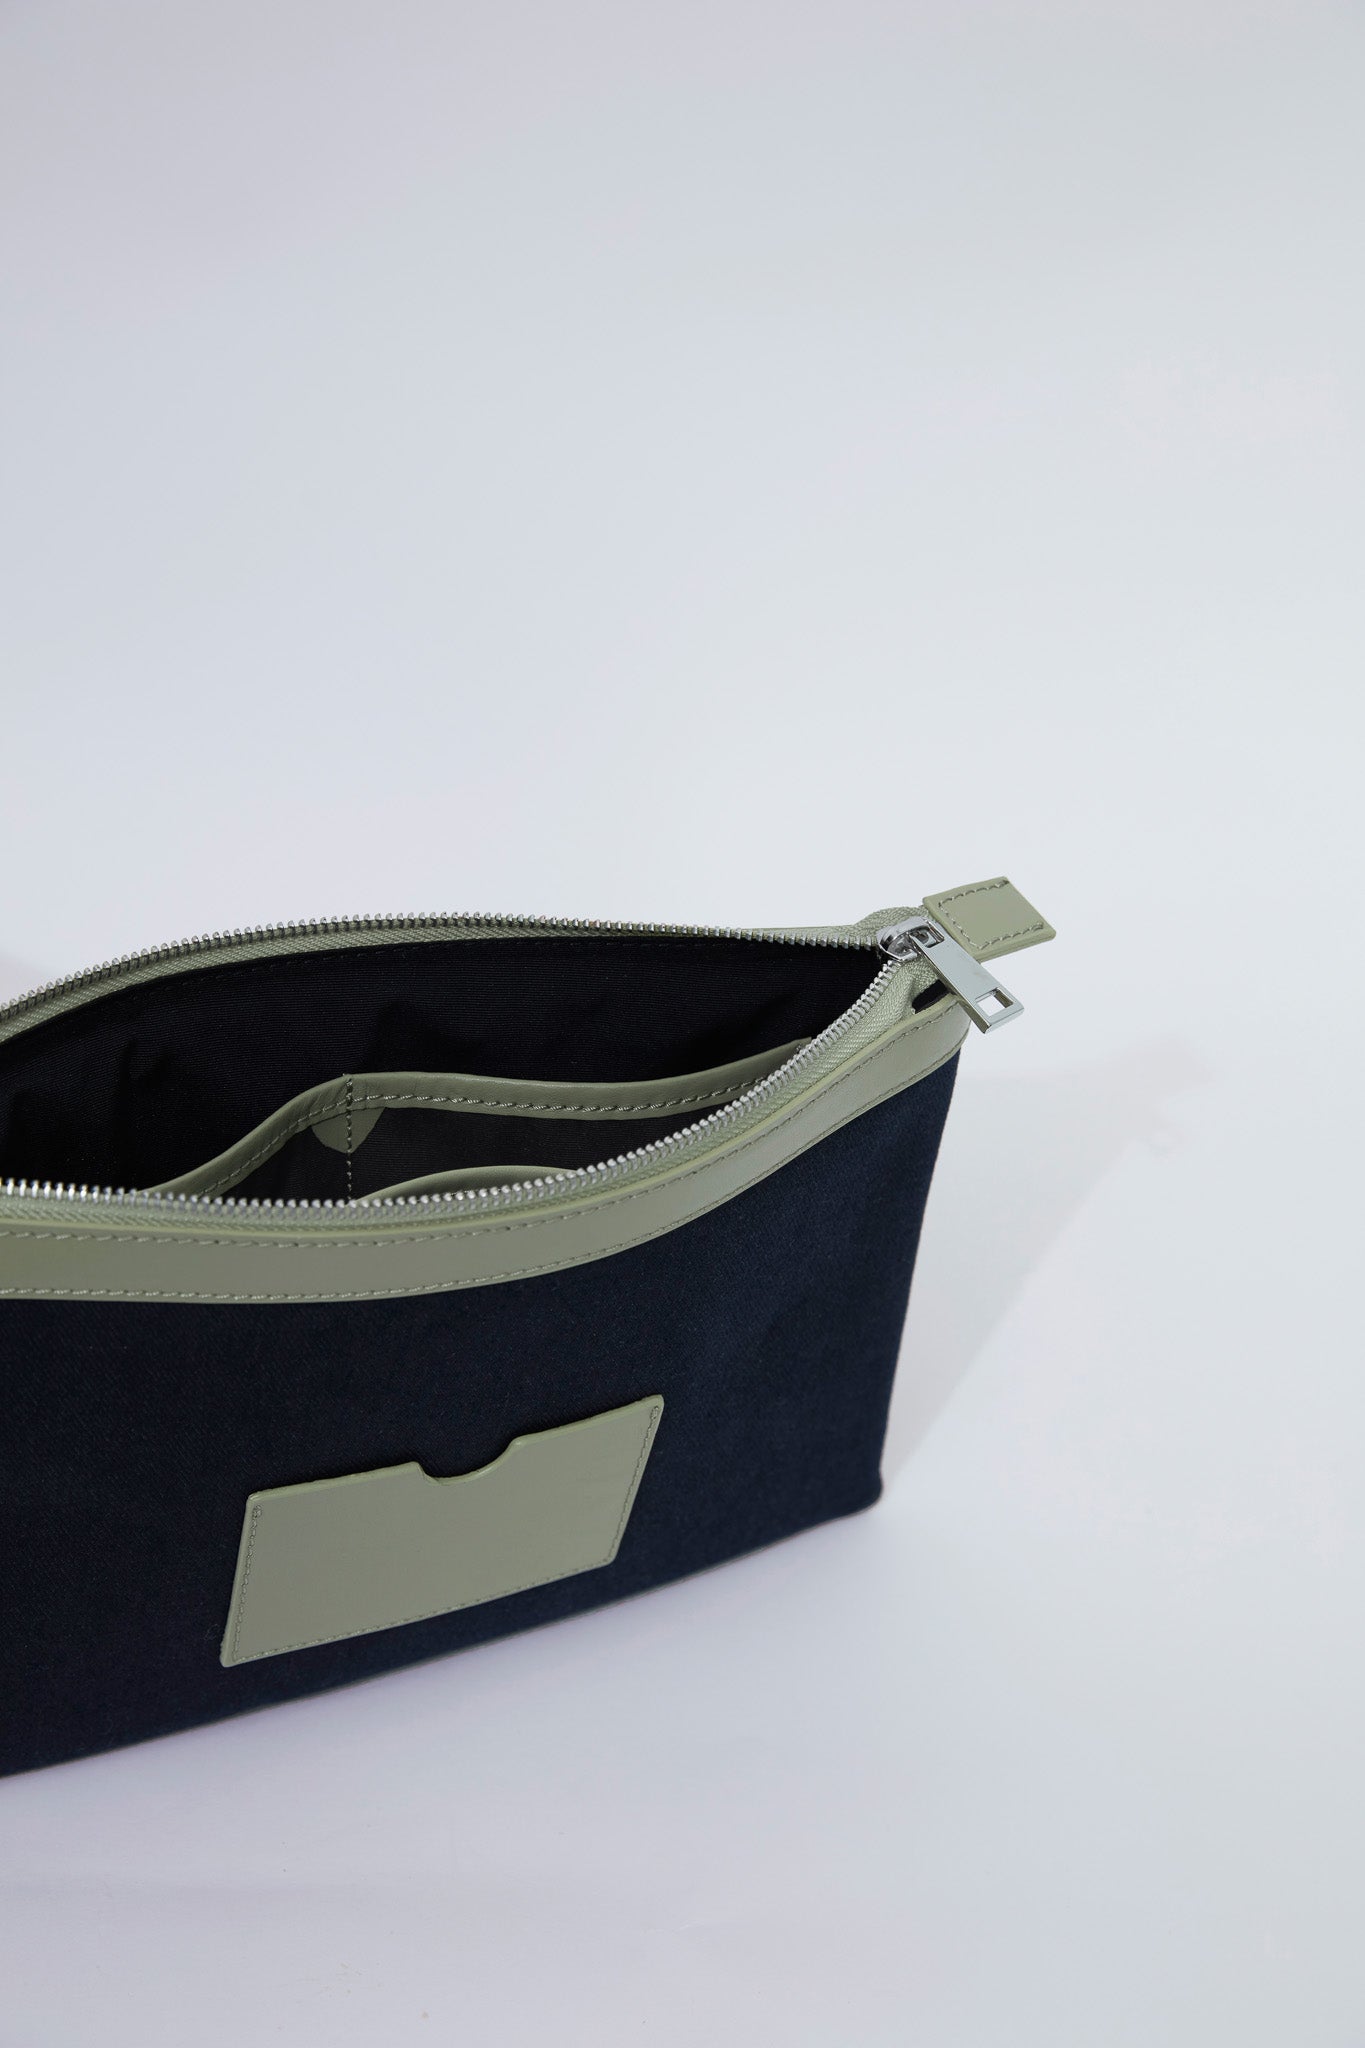 STITCHED CLUTCH BAG IN NAVY AND OIL GREEN